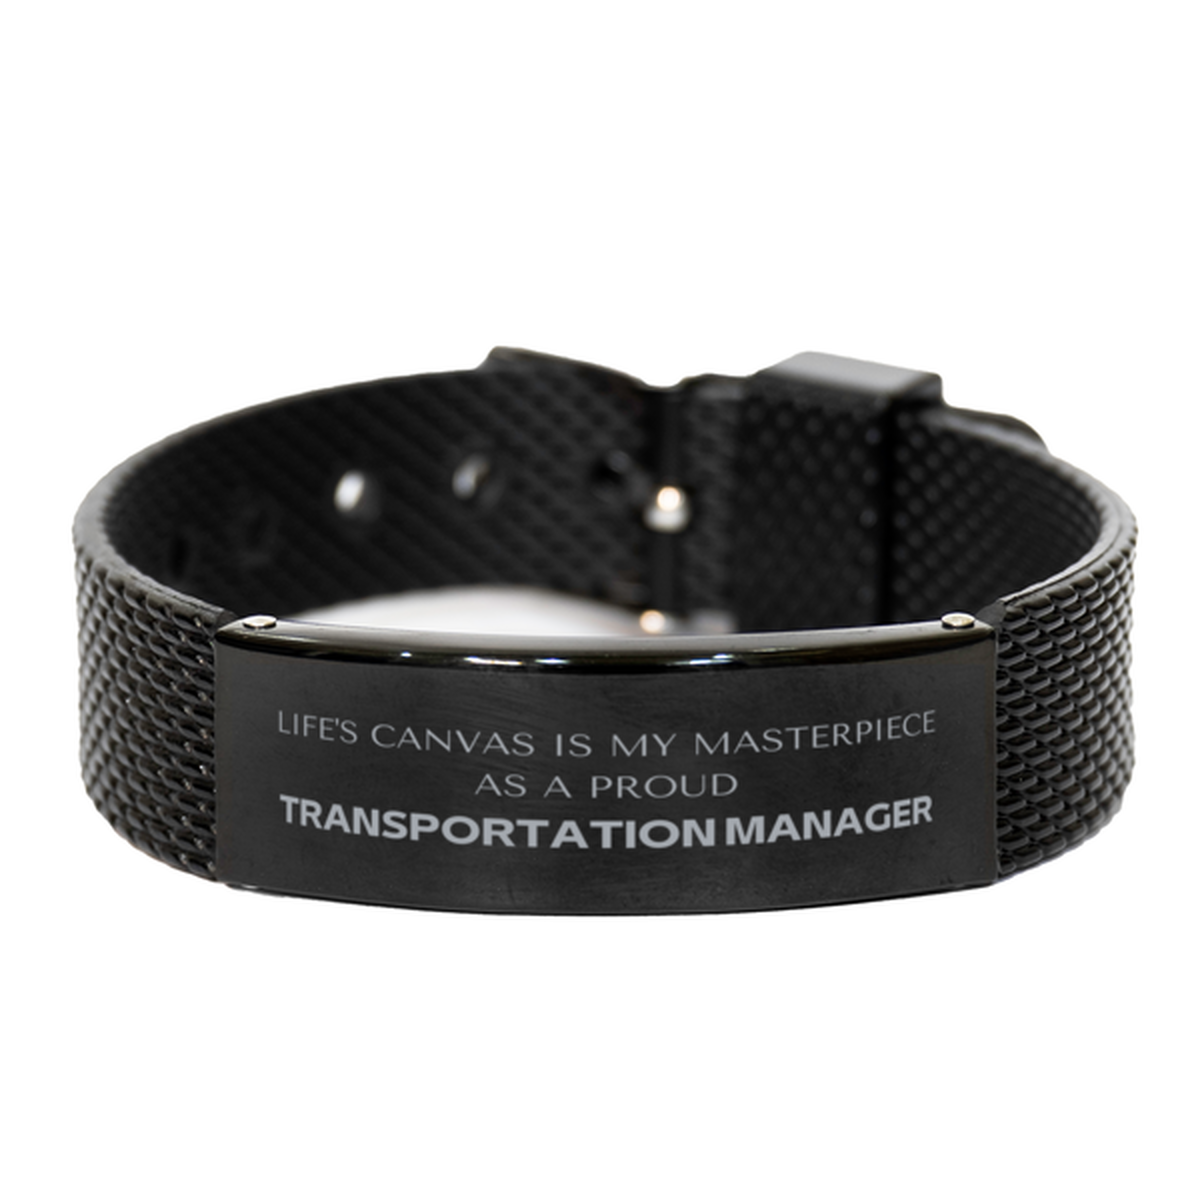 Proud Transportation Manager Gifts, Life's canvas is my masterpiece, Epic Birthday Christmas Unique Black Shark Mesh Bracelet For Transportation Manager, Coworkers, Men, Women, Friends